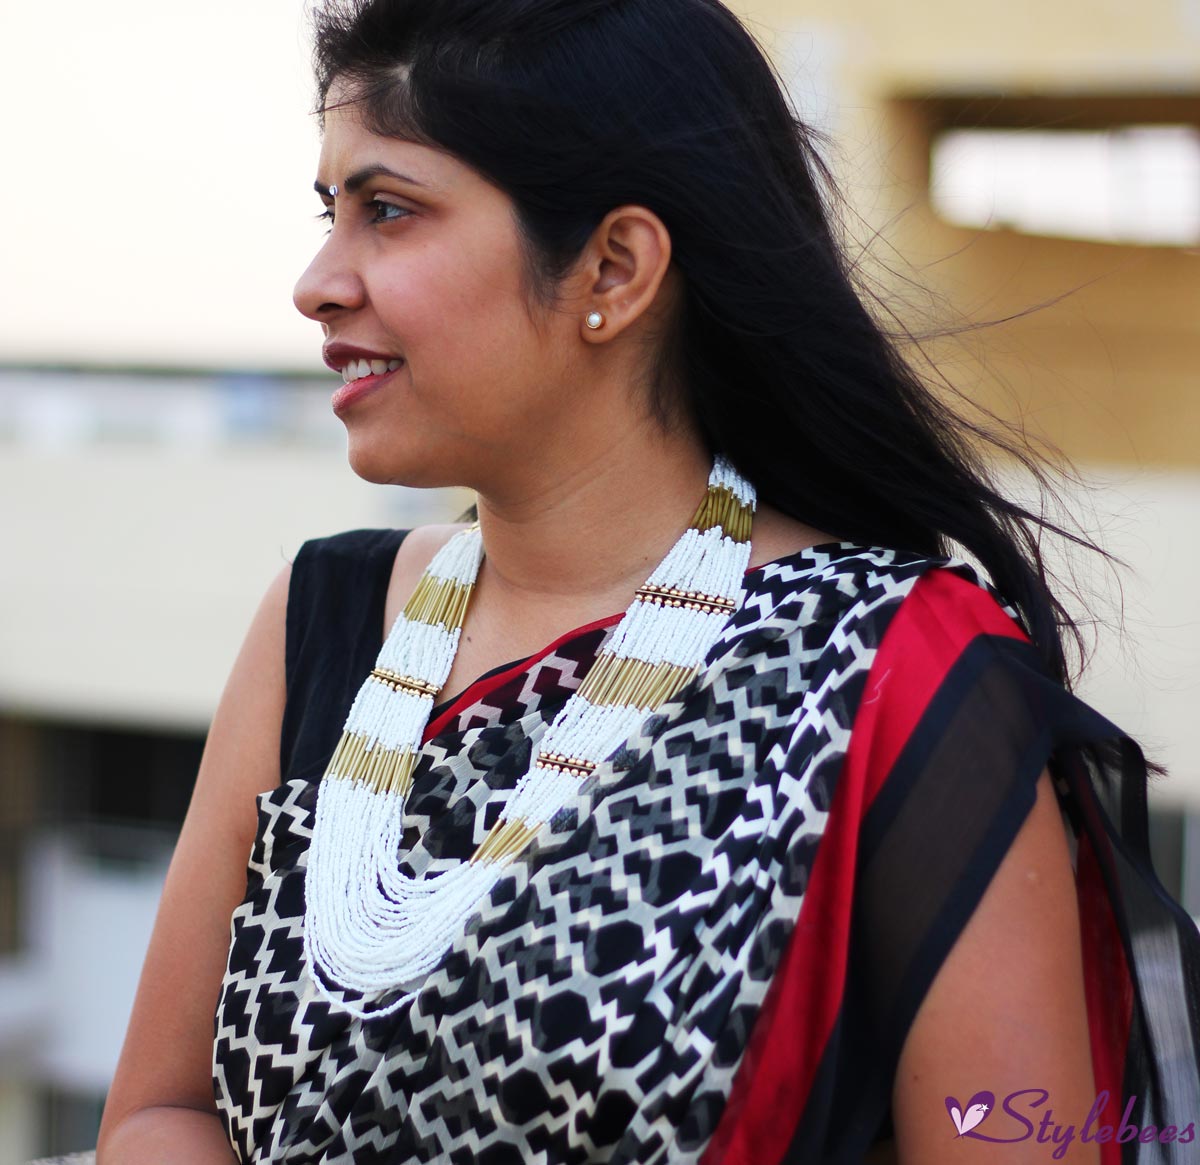 OOTD: Red and Black Printed Saree Styled With A Necklace - Stylebees.com